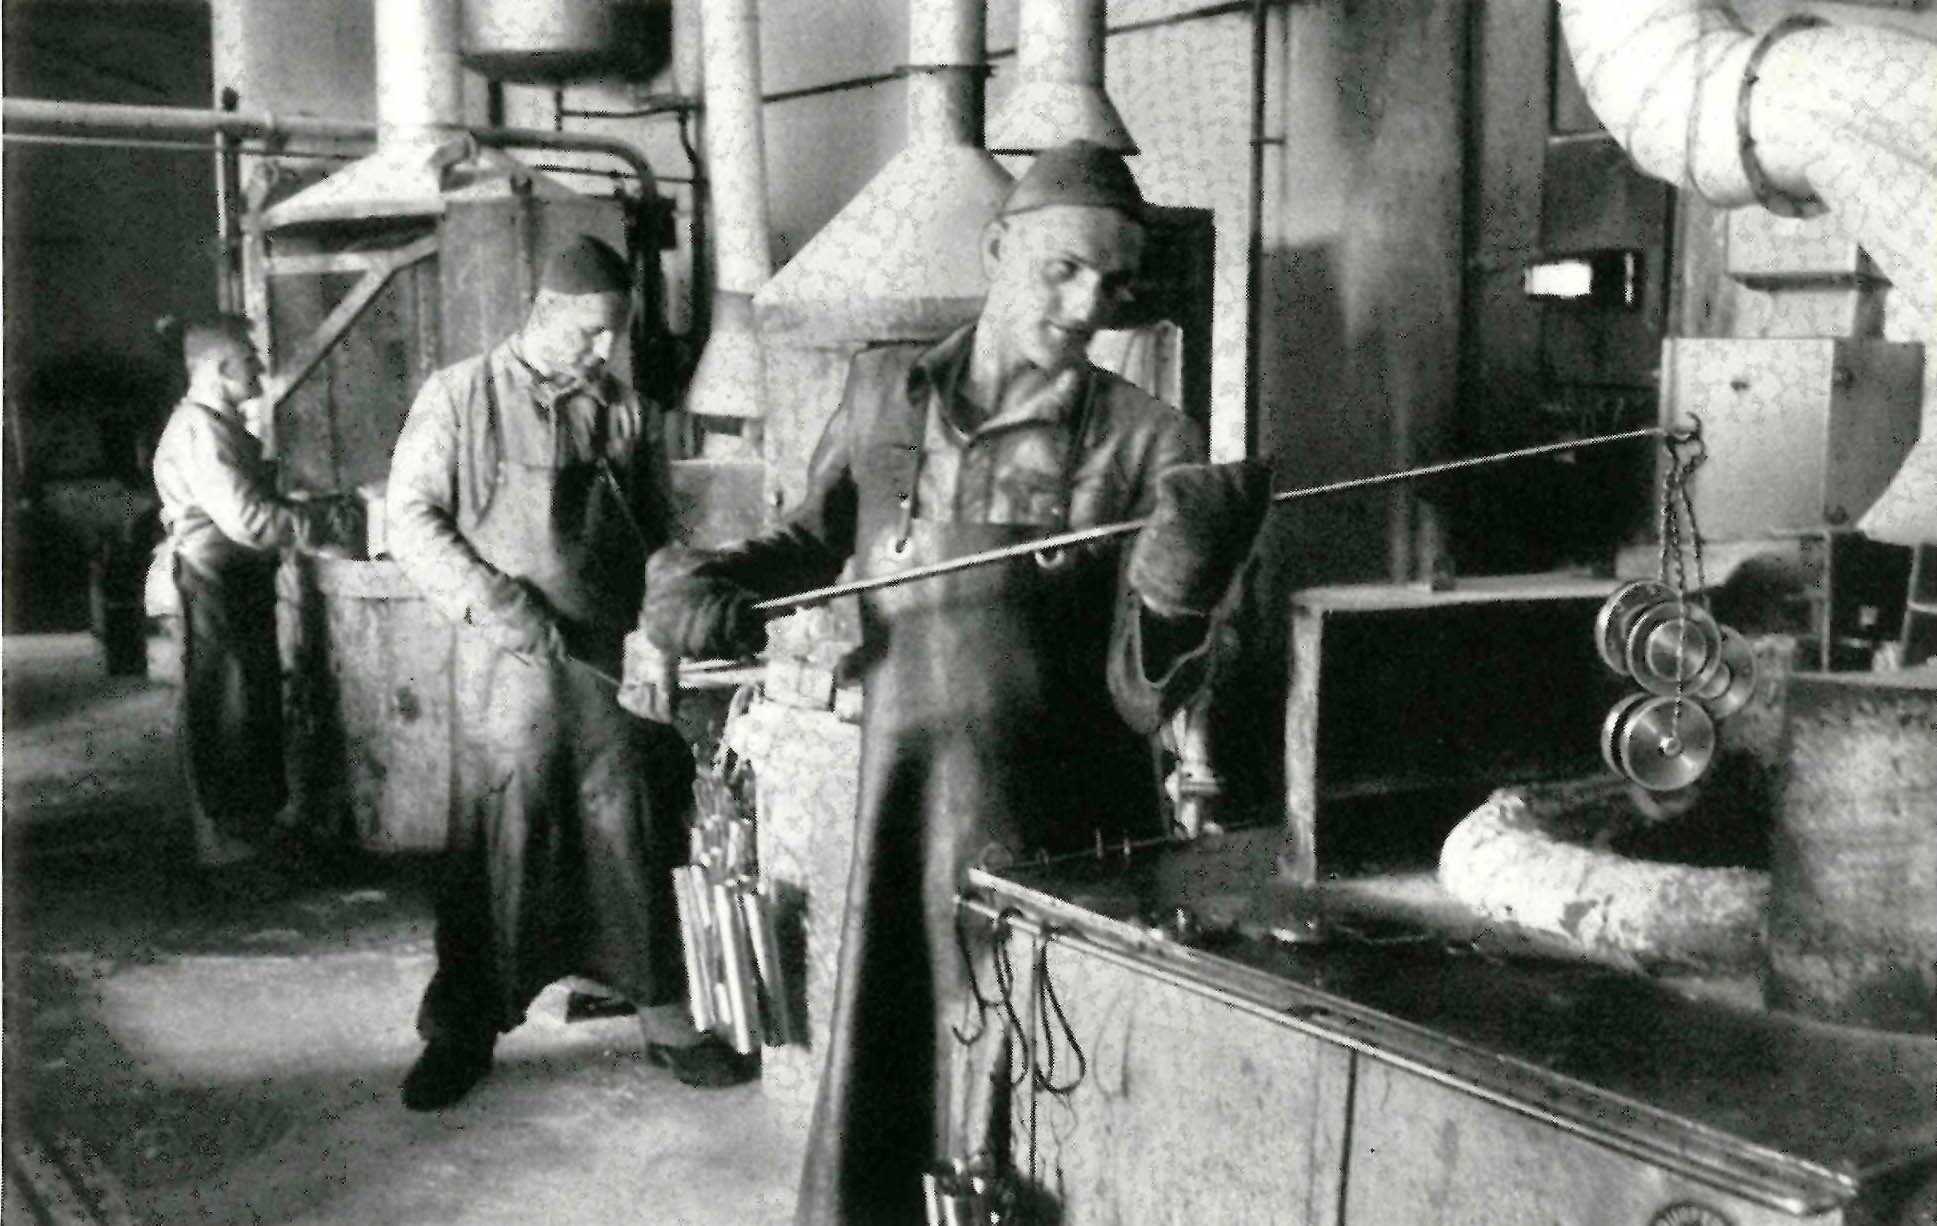 1945: Hardening processes at steel plant in the early days of the association. Swiss Association of Textile Machinery Manufacturers.